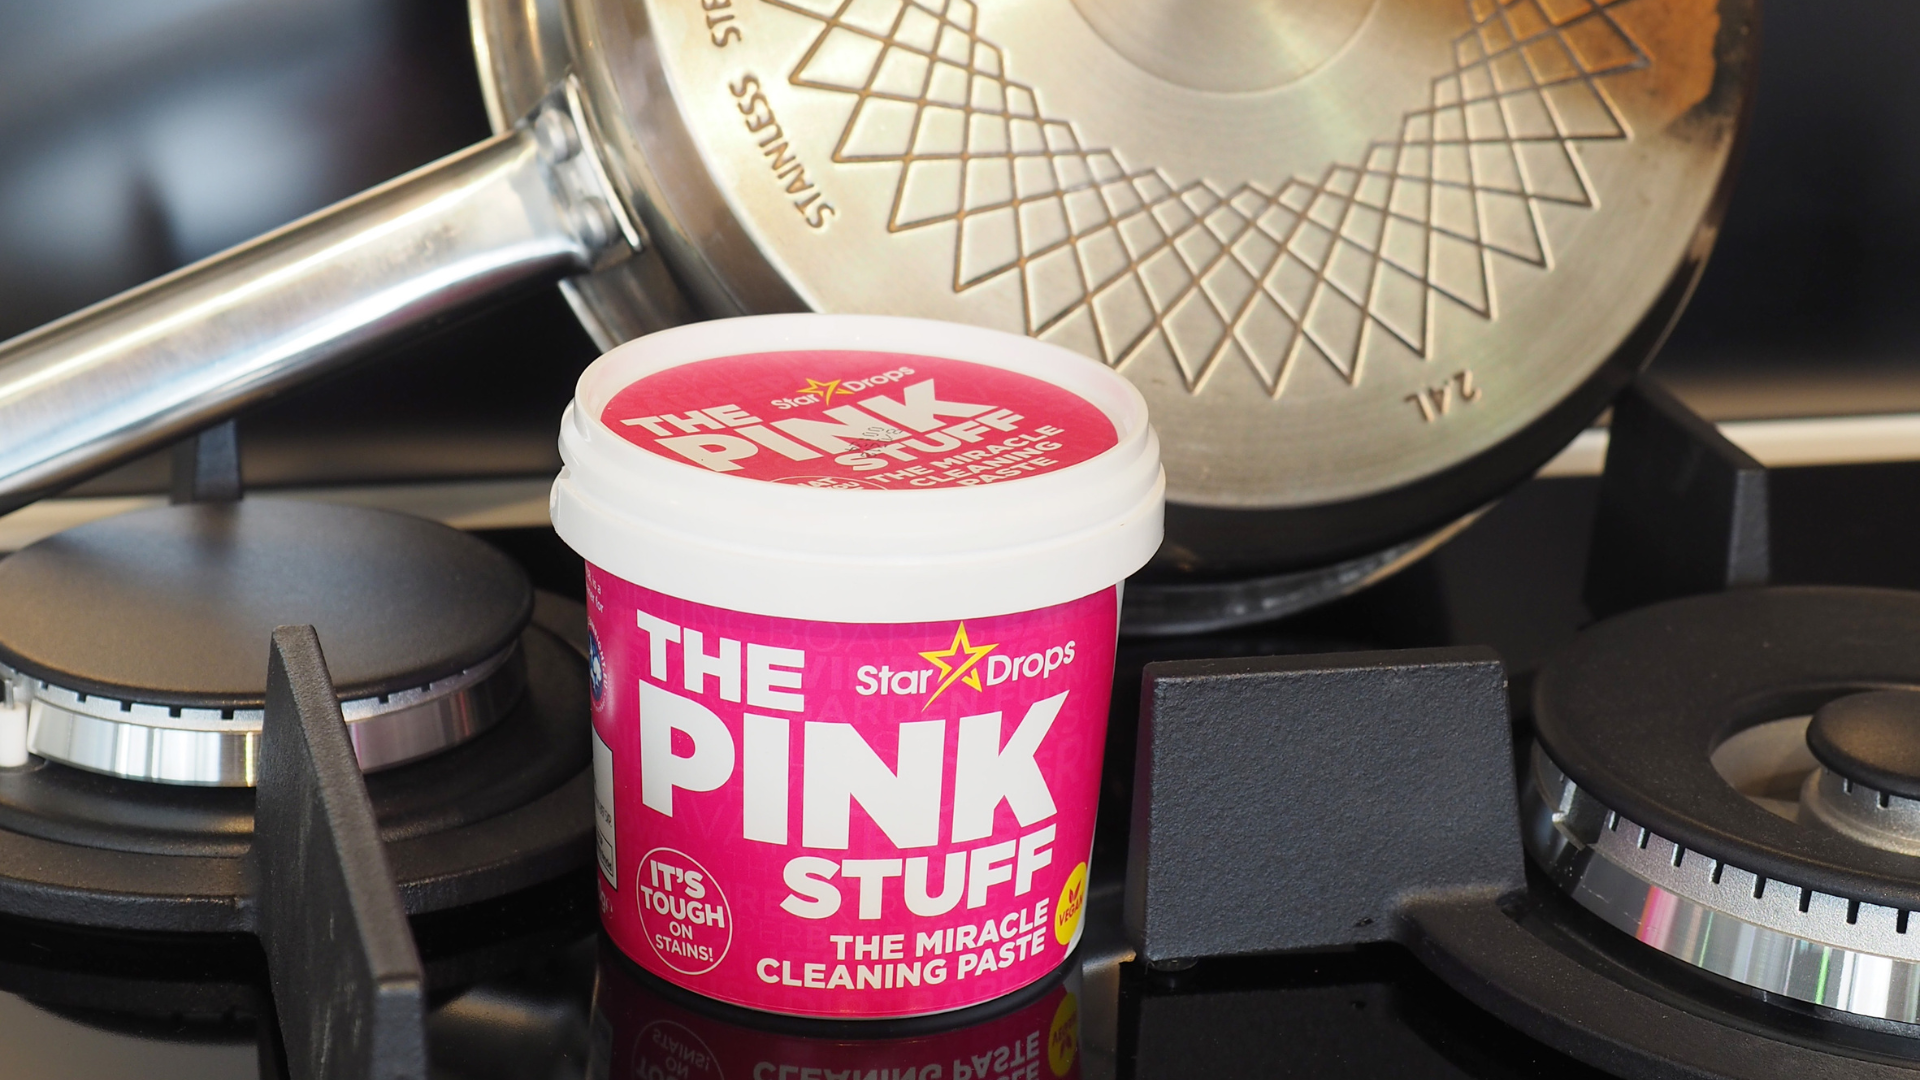 10 Cleaning Hacks Using The Pink Stuff